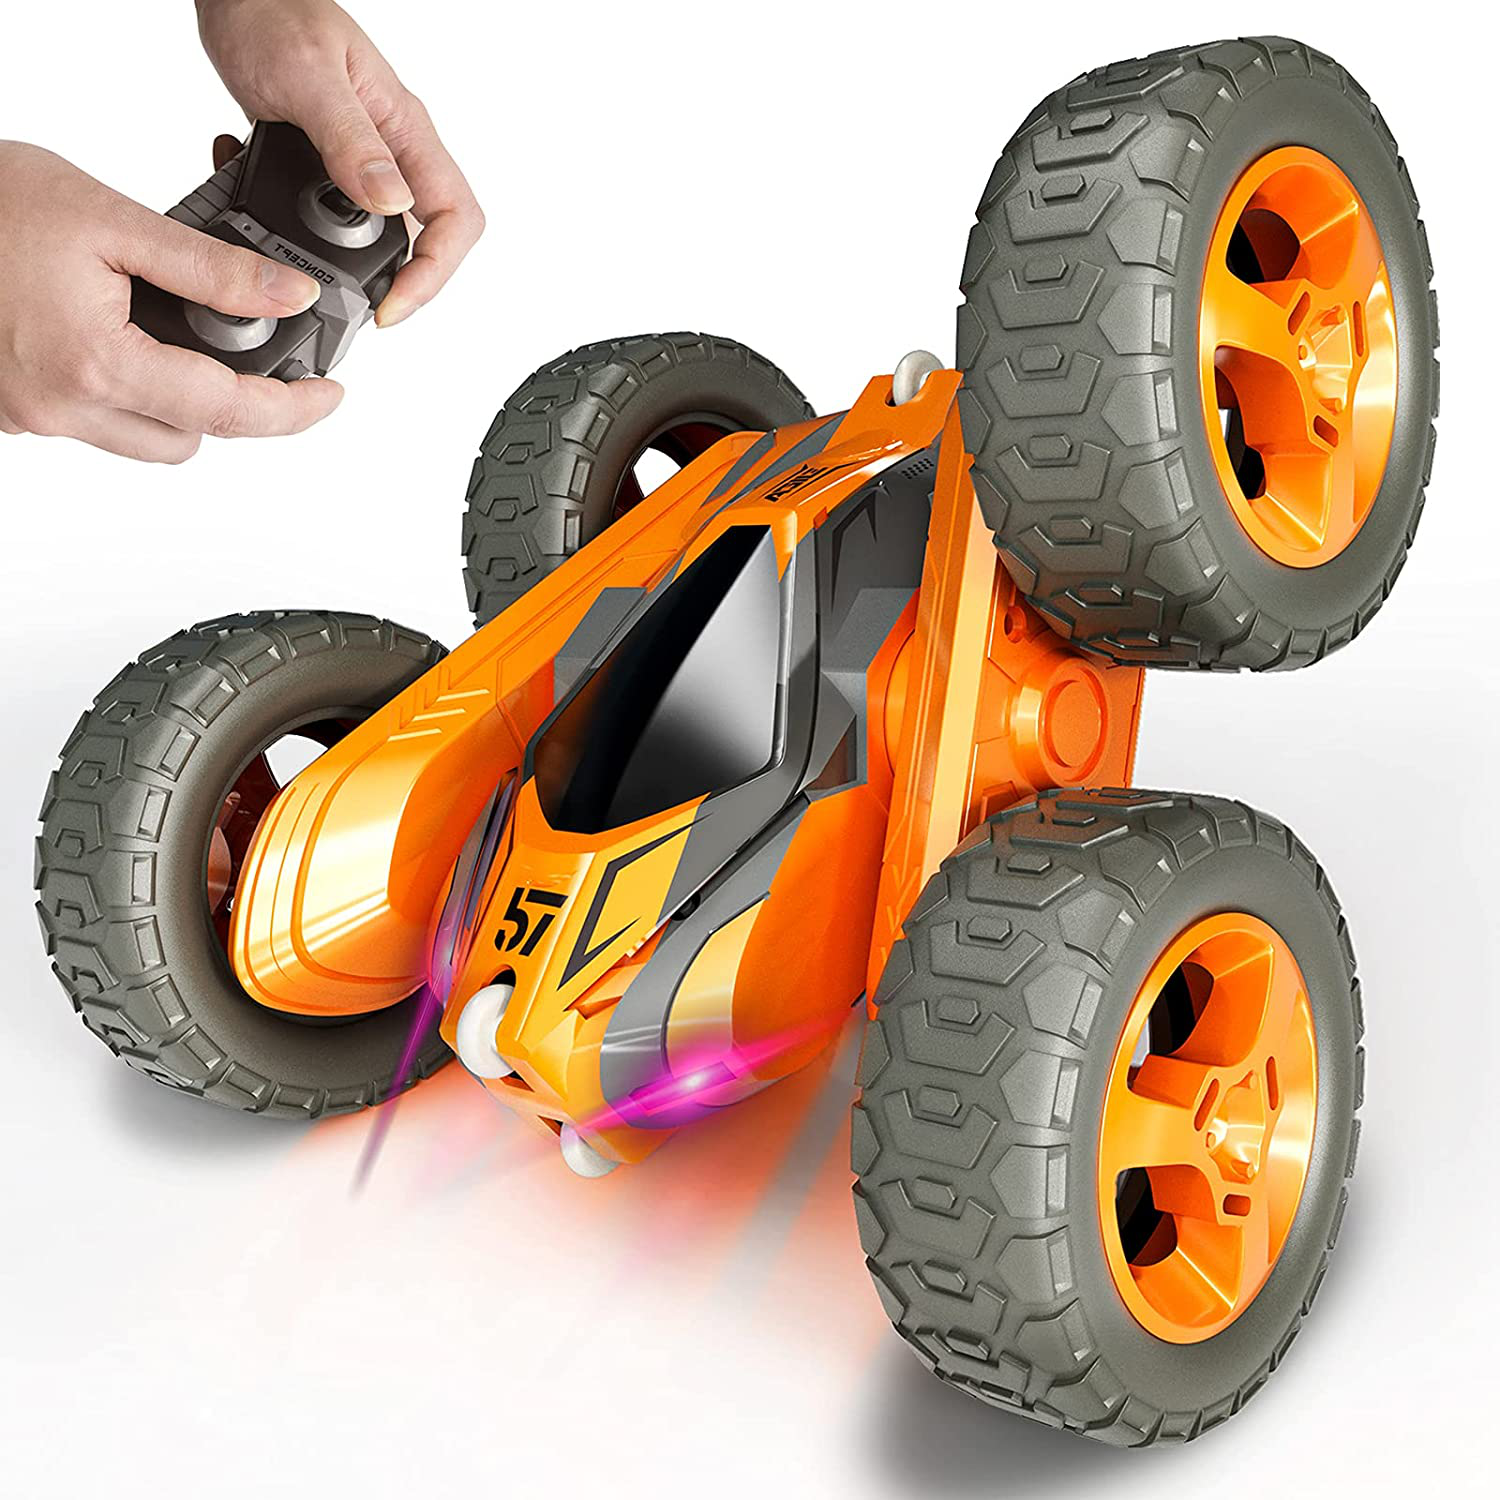 Tecnock Remote Control Car for Kids,360 ° Rotating Double Sided Flip RC Stunt Car,2.4Ghz 4WD Toy Car with Rechargeable Battery for 45 Min Play,Great Gifts for Boys and Girls(Orange)